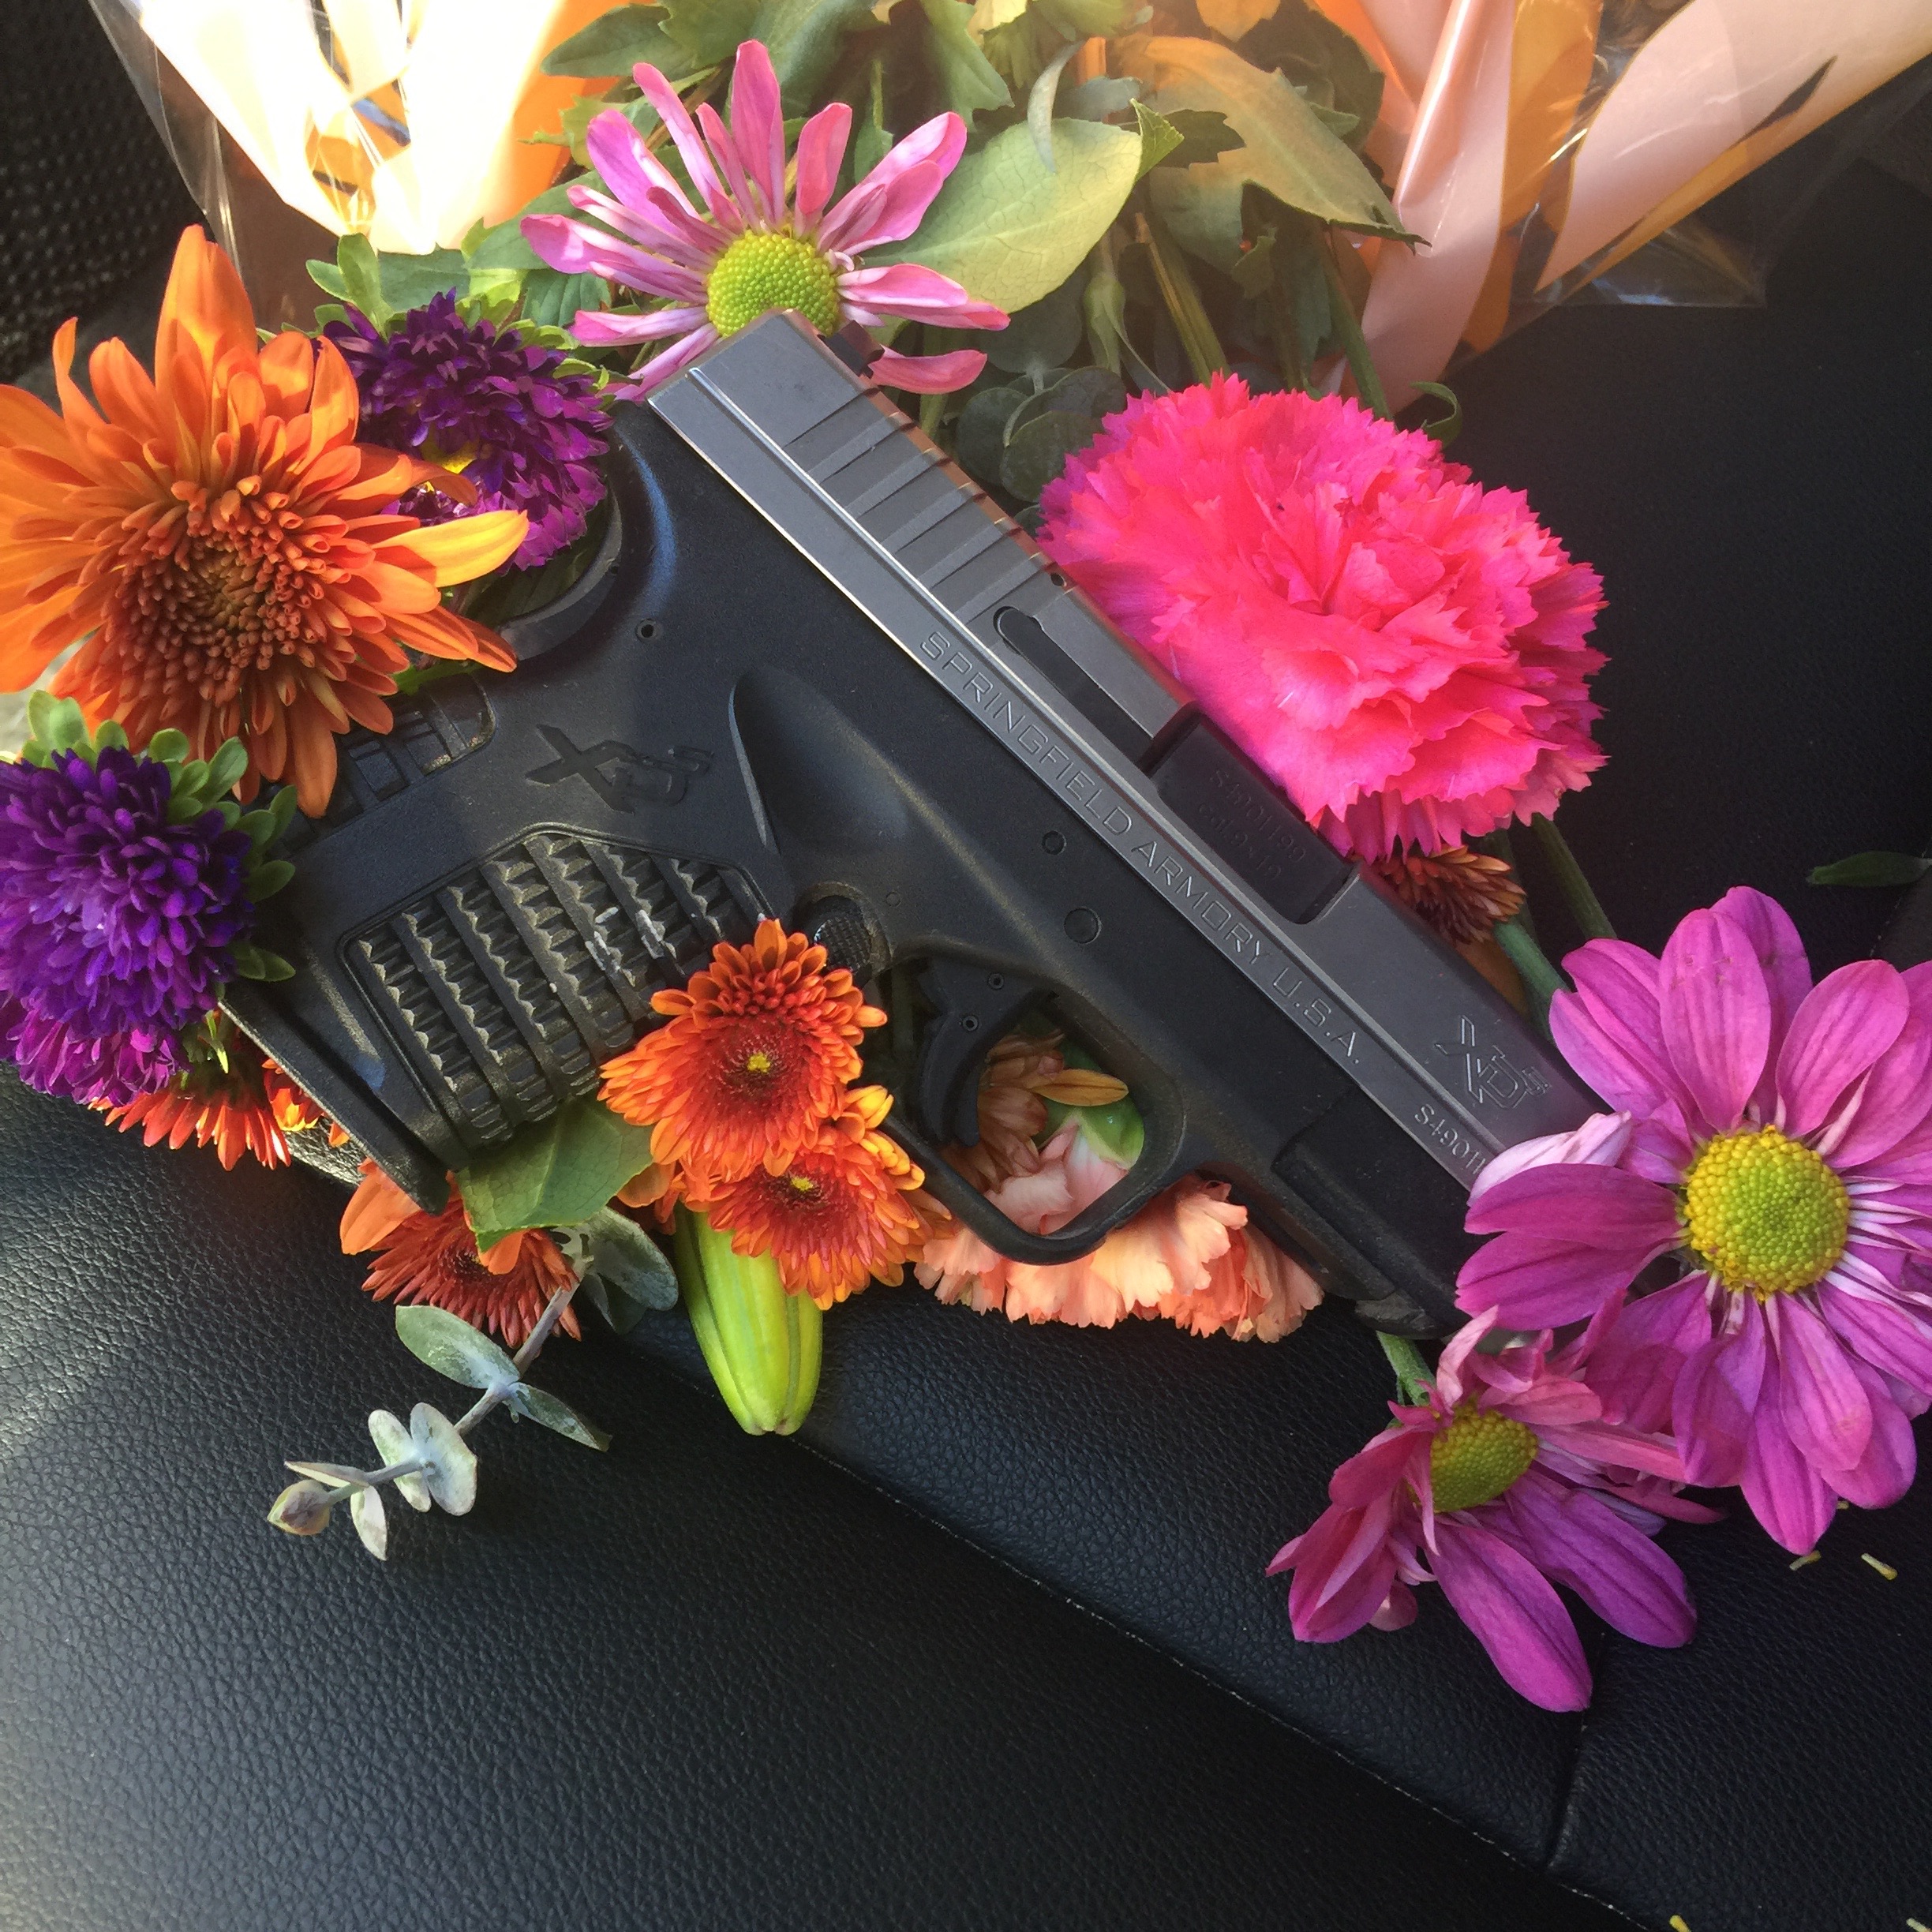 Flowers or Guns? Good Guys Have Both, Actuallyproduct featured image thumbnail.